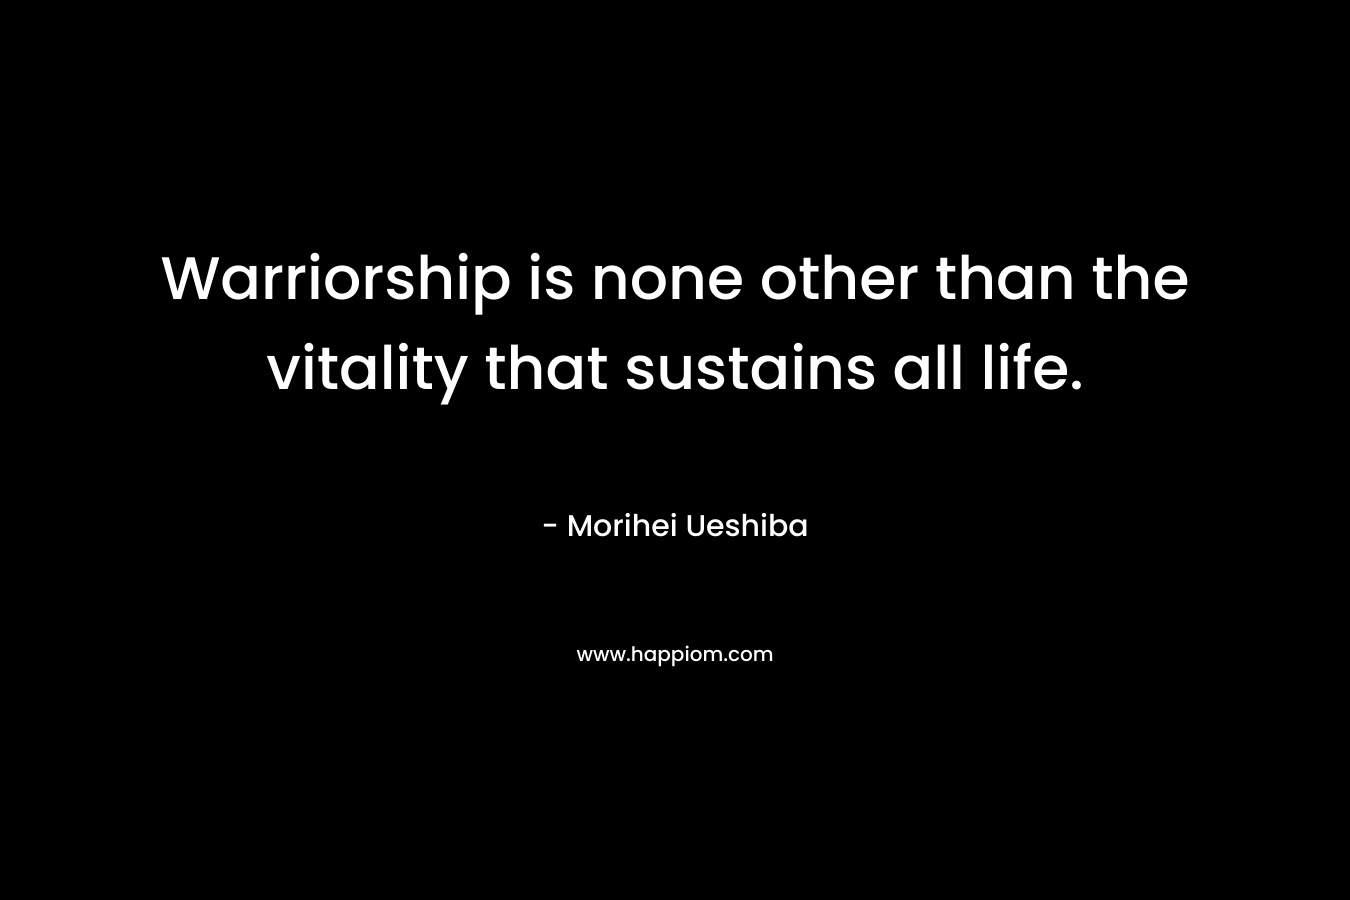 Warriorship is none other than the vitality that sustains all life. – Morihei Ueshiba